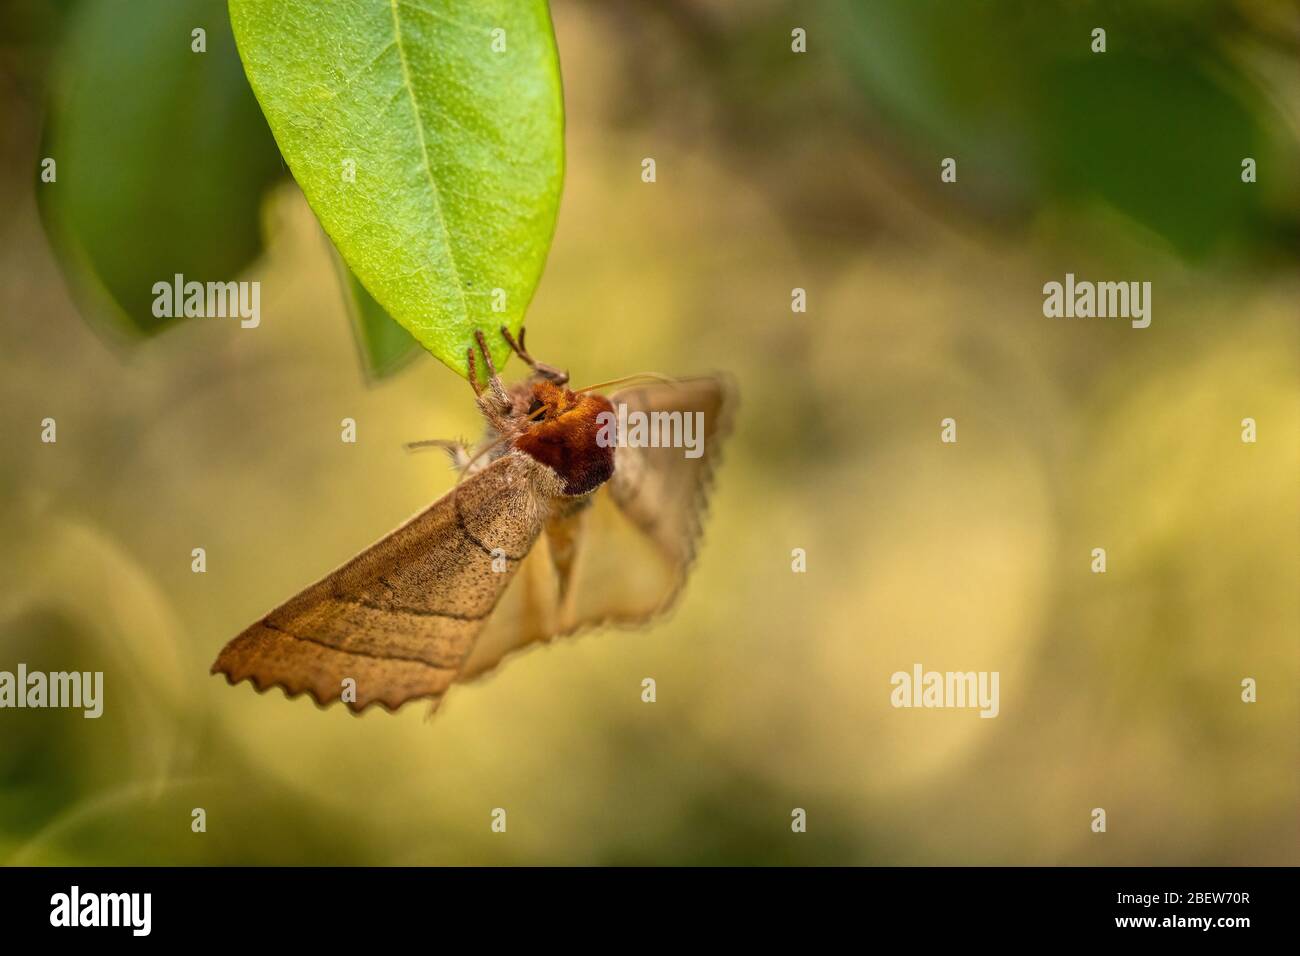 Macro image of a moth on a rhododendron leaf Stock Photo